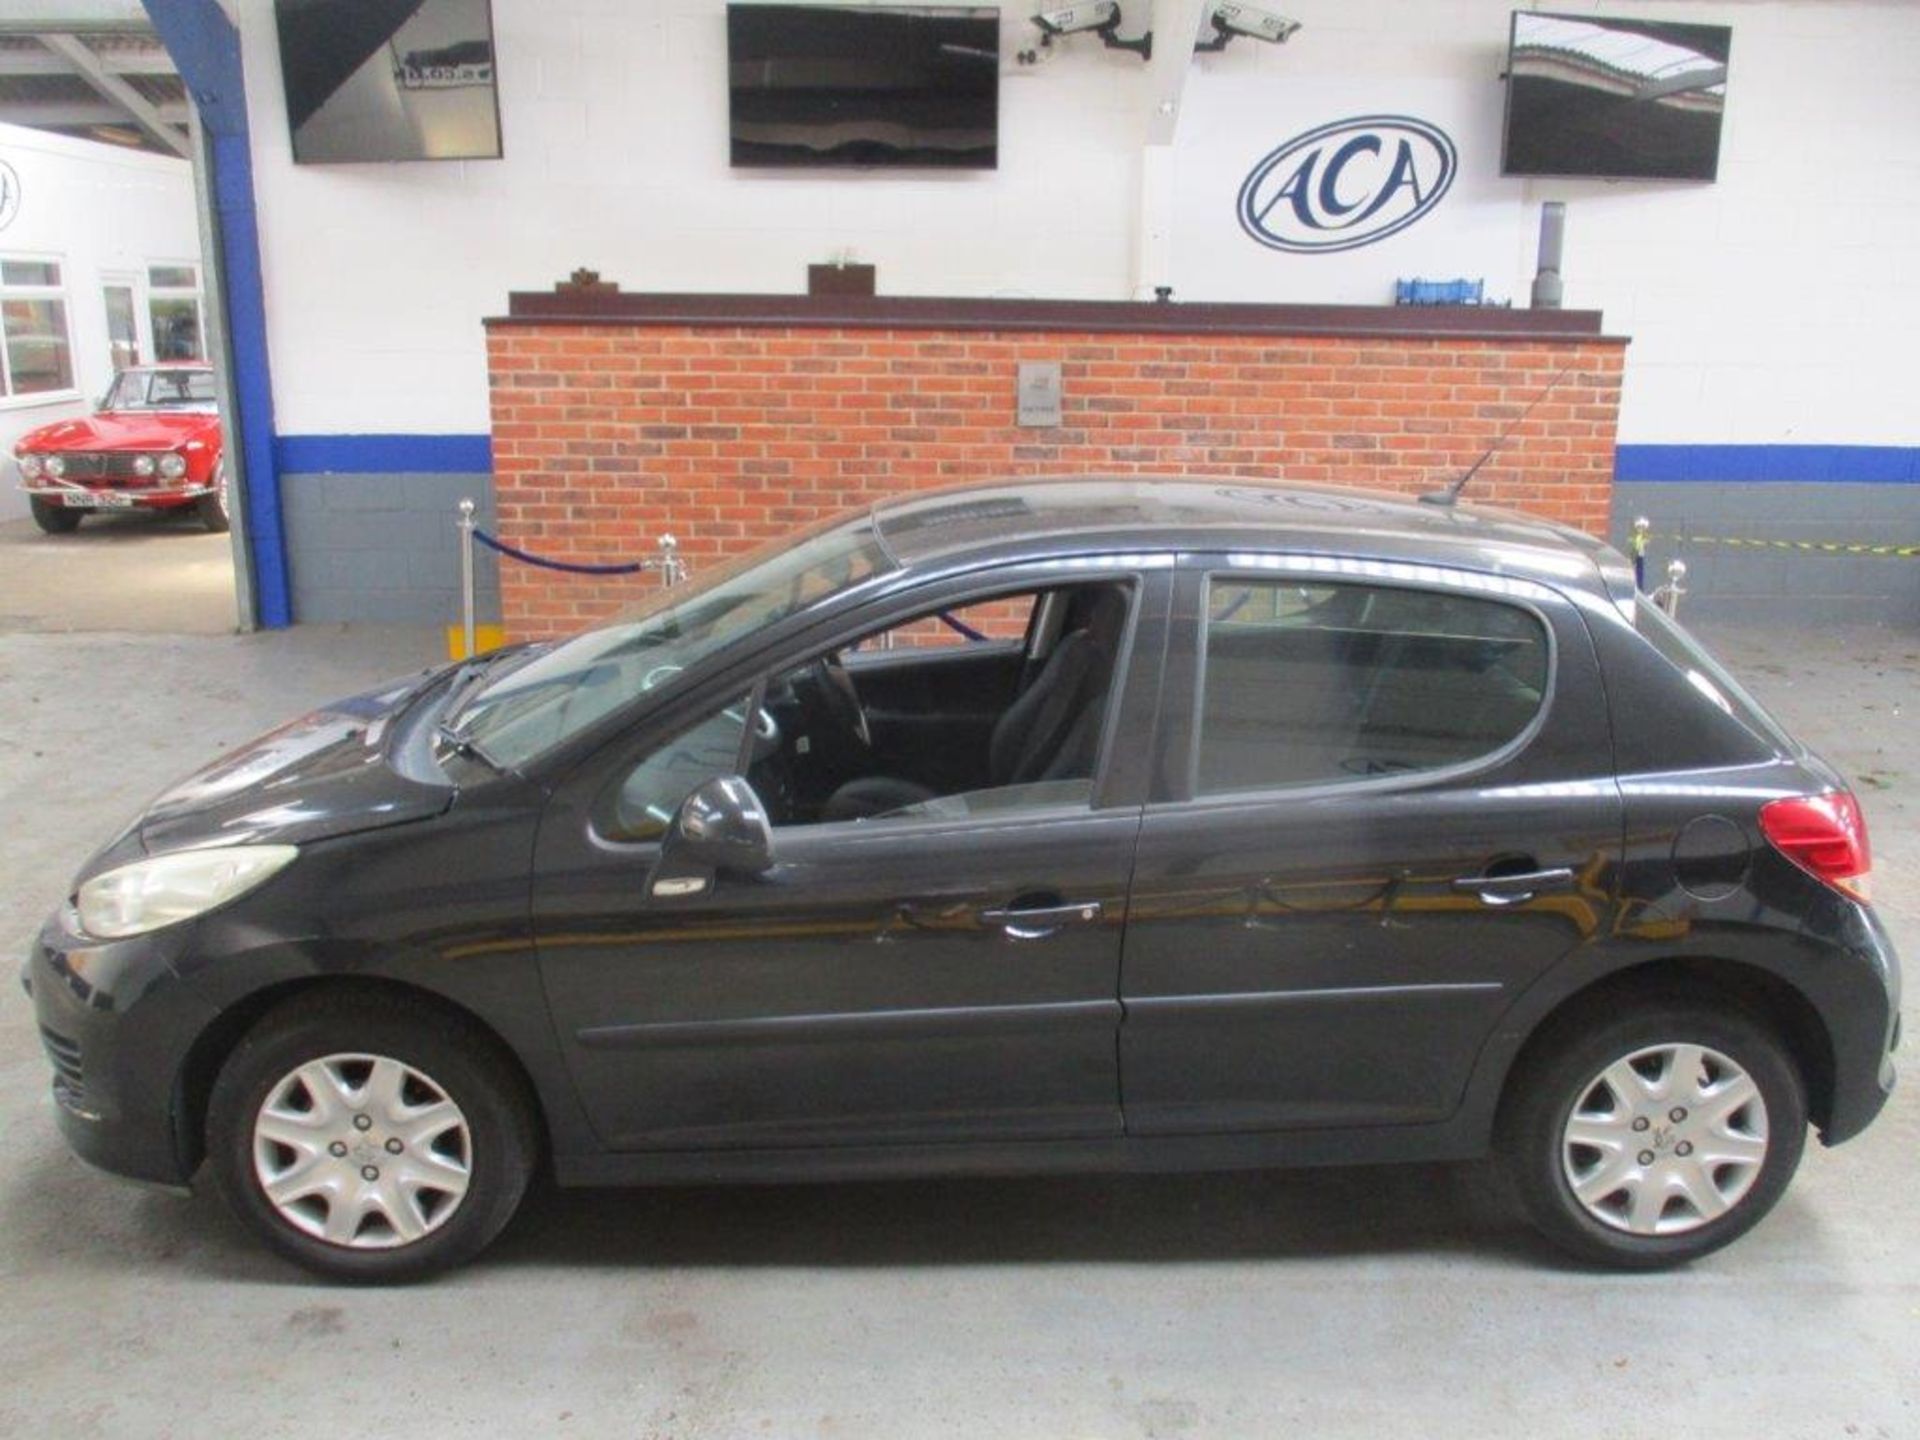 10 10 Peugeot 207 S - Image 2 of 23